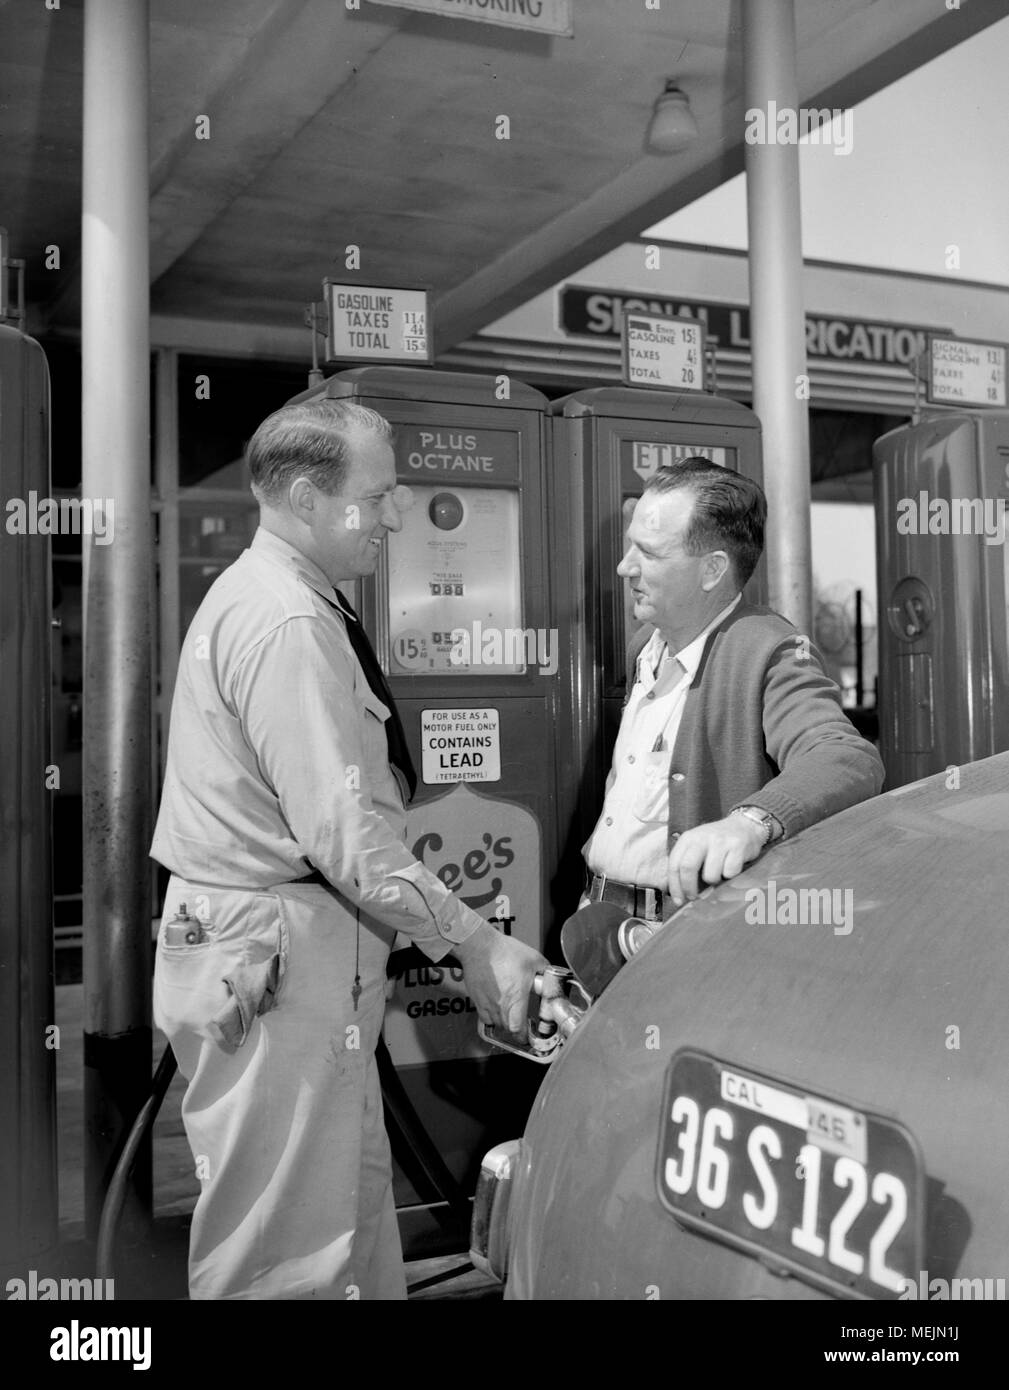 A car owner gets a assistance from a service station attendant in California, ca. 1946. Stock Photo